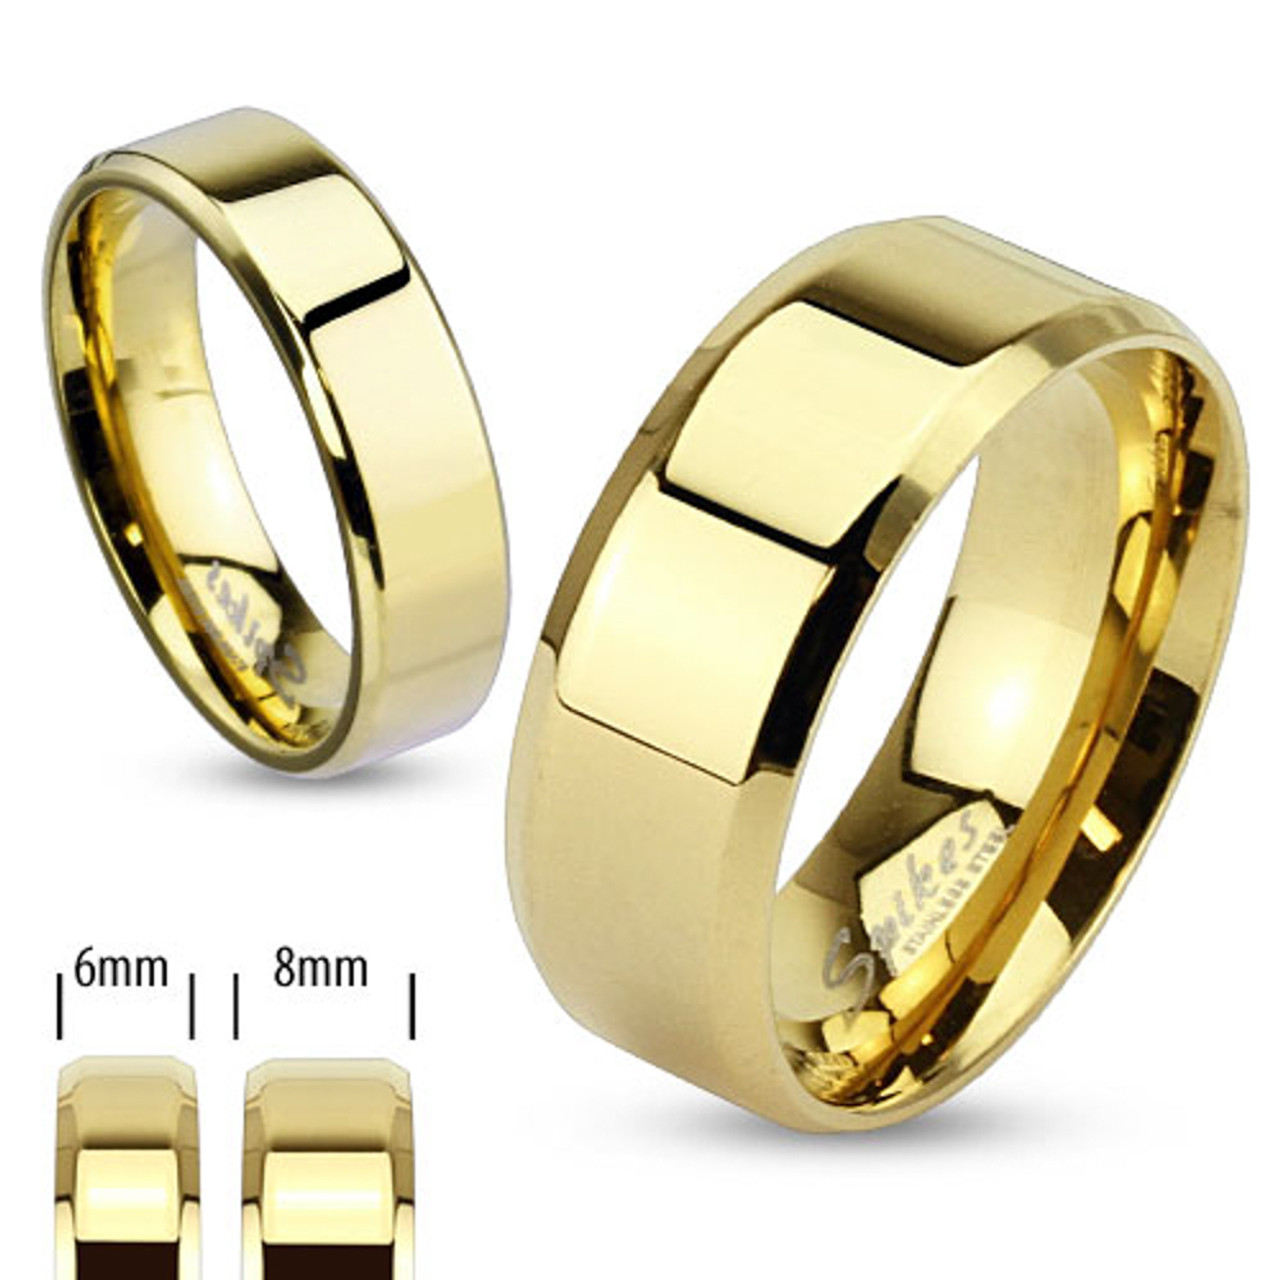 14K Gold Ion Plated Stainless Steel Beveled Edge Wedding Band Ring - Sizes  5-14 - MarimorJewelry.com